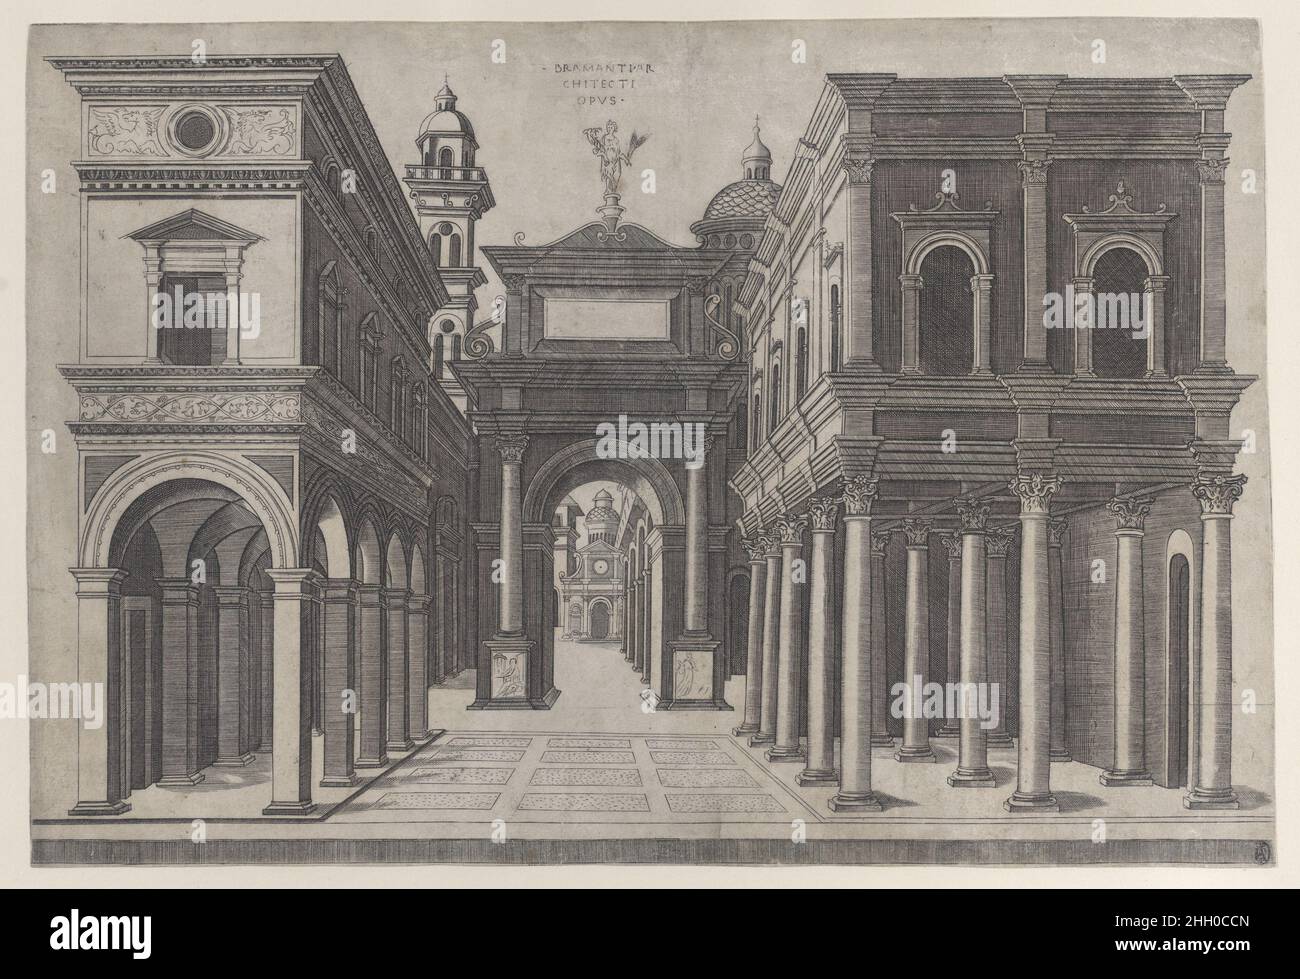 A street with various buildings, colonnades and an arch 1475–1510 Donato d'Agnolo Bramante. A street with various buildings, colonnades and an arch. Donato d'Agnolo Bramante (Italian, 1444–1515). 1475–1510. Engraving. Prints Stock Photo